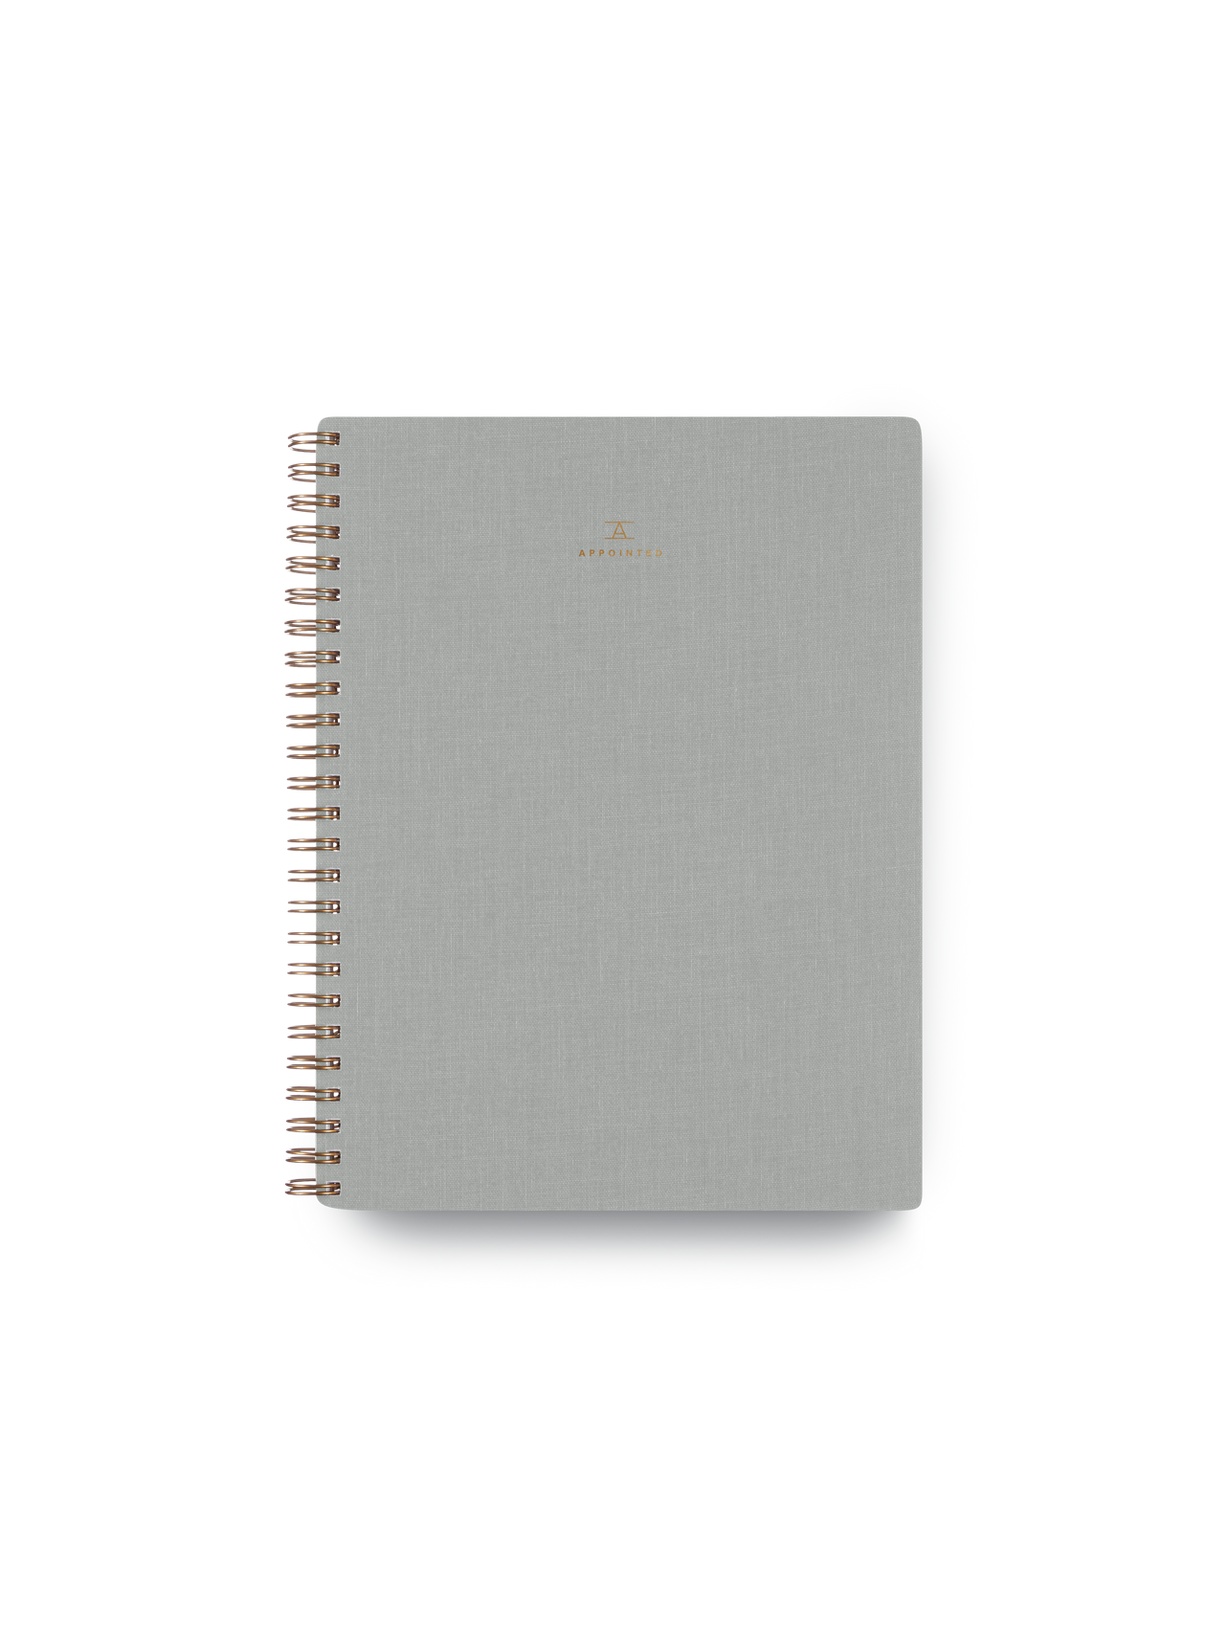 Appointed Dot Grid Workbook in Dove Gray bookcloth with brass wire-o binding front cover || Dove Gray